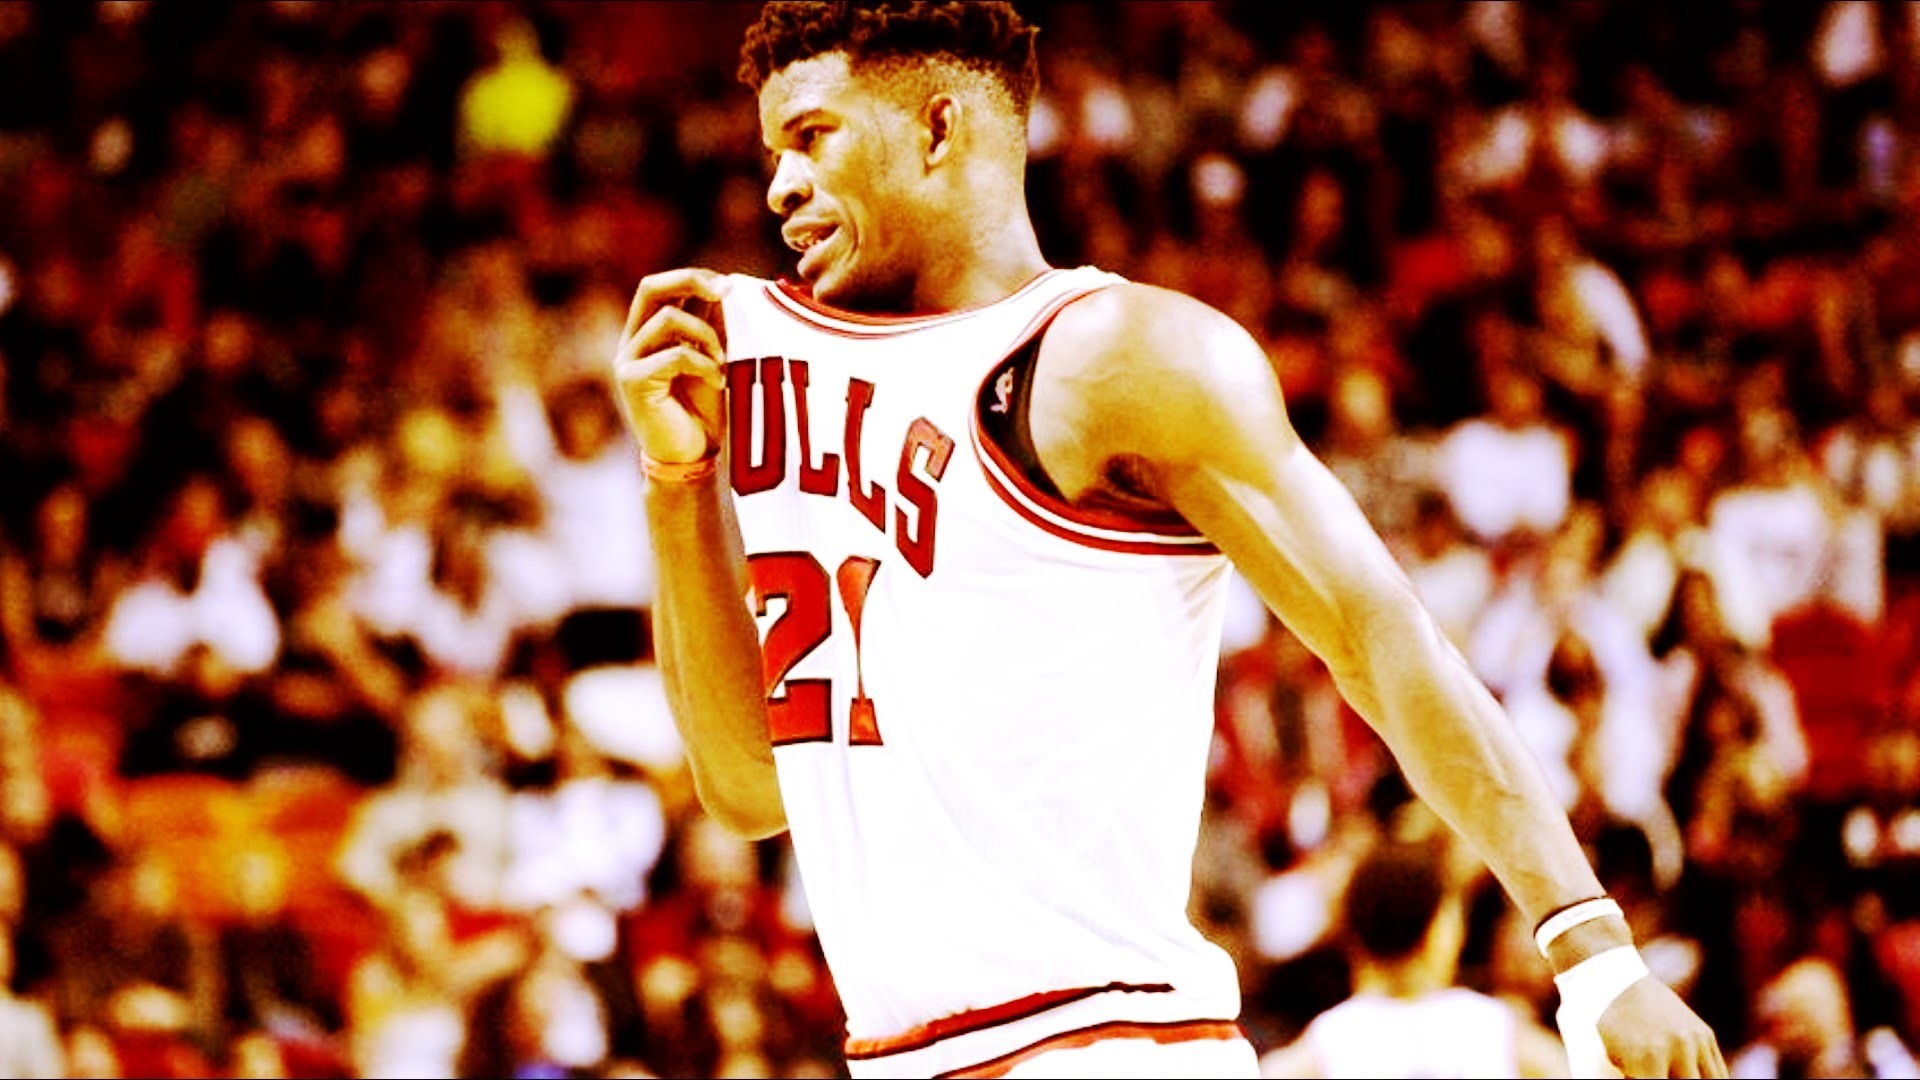 Jimmy Butler Wallpapers 67 images